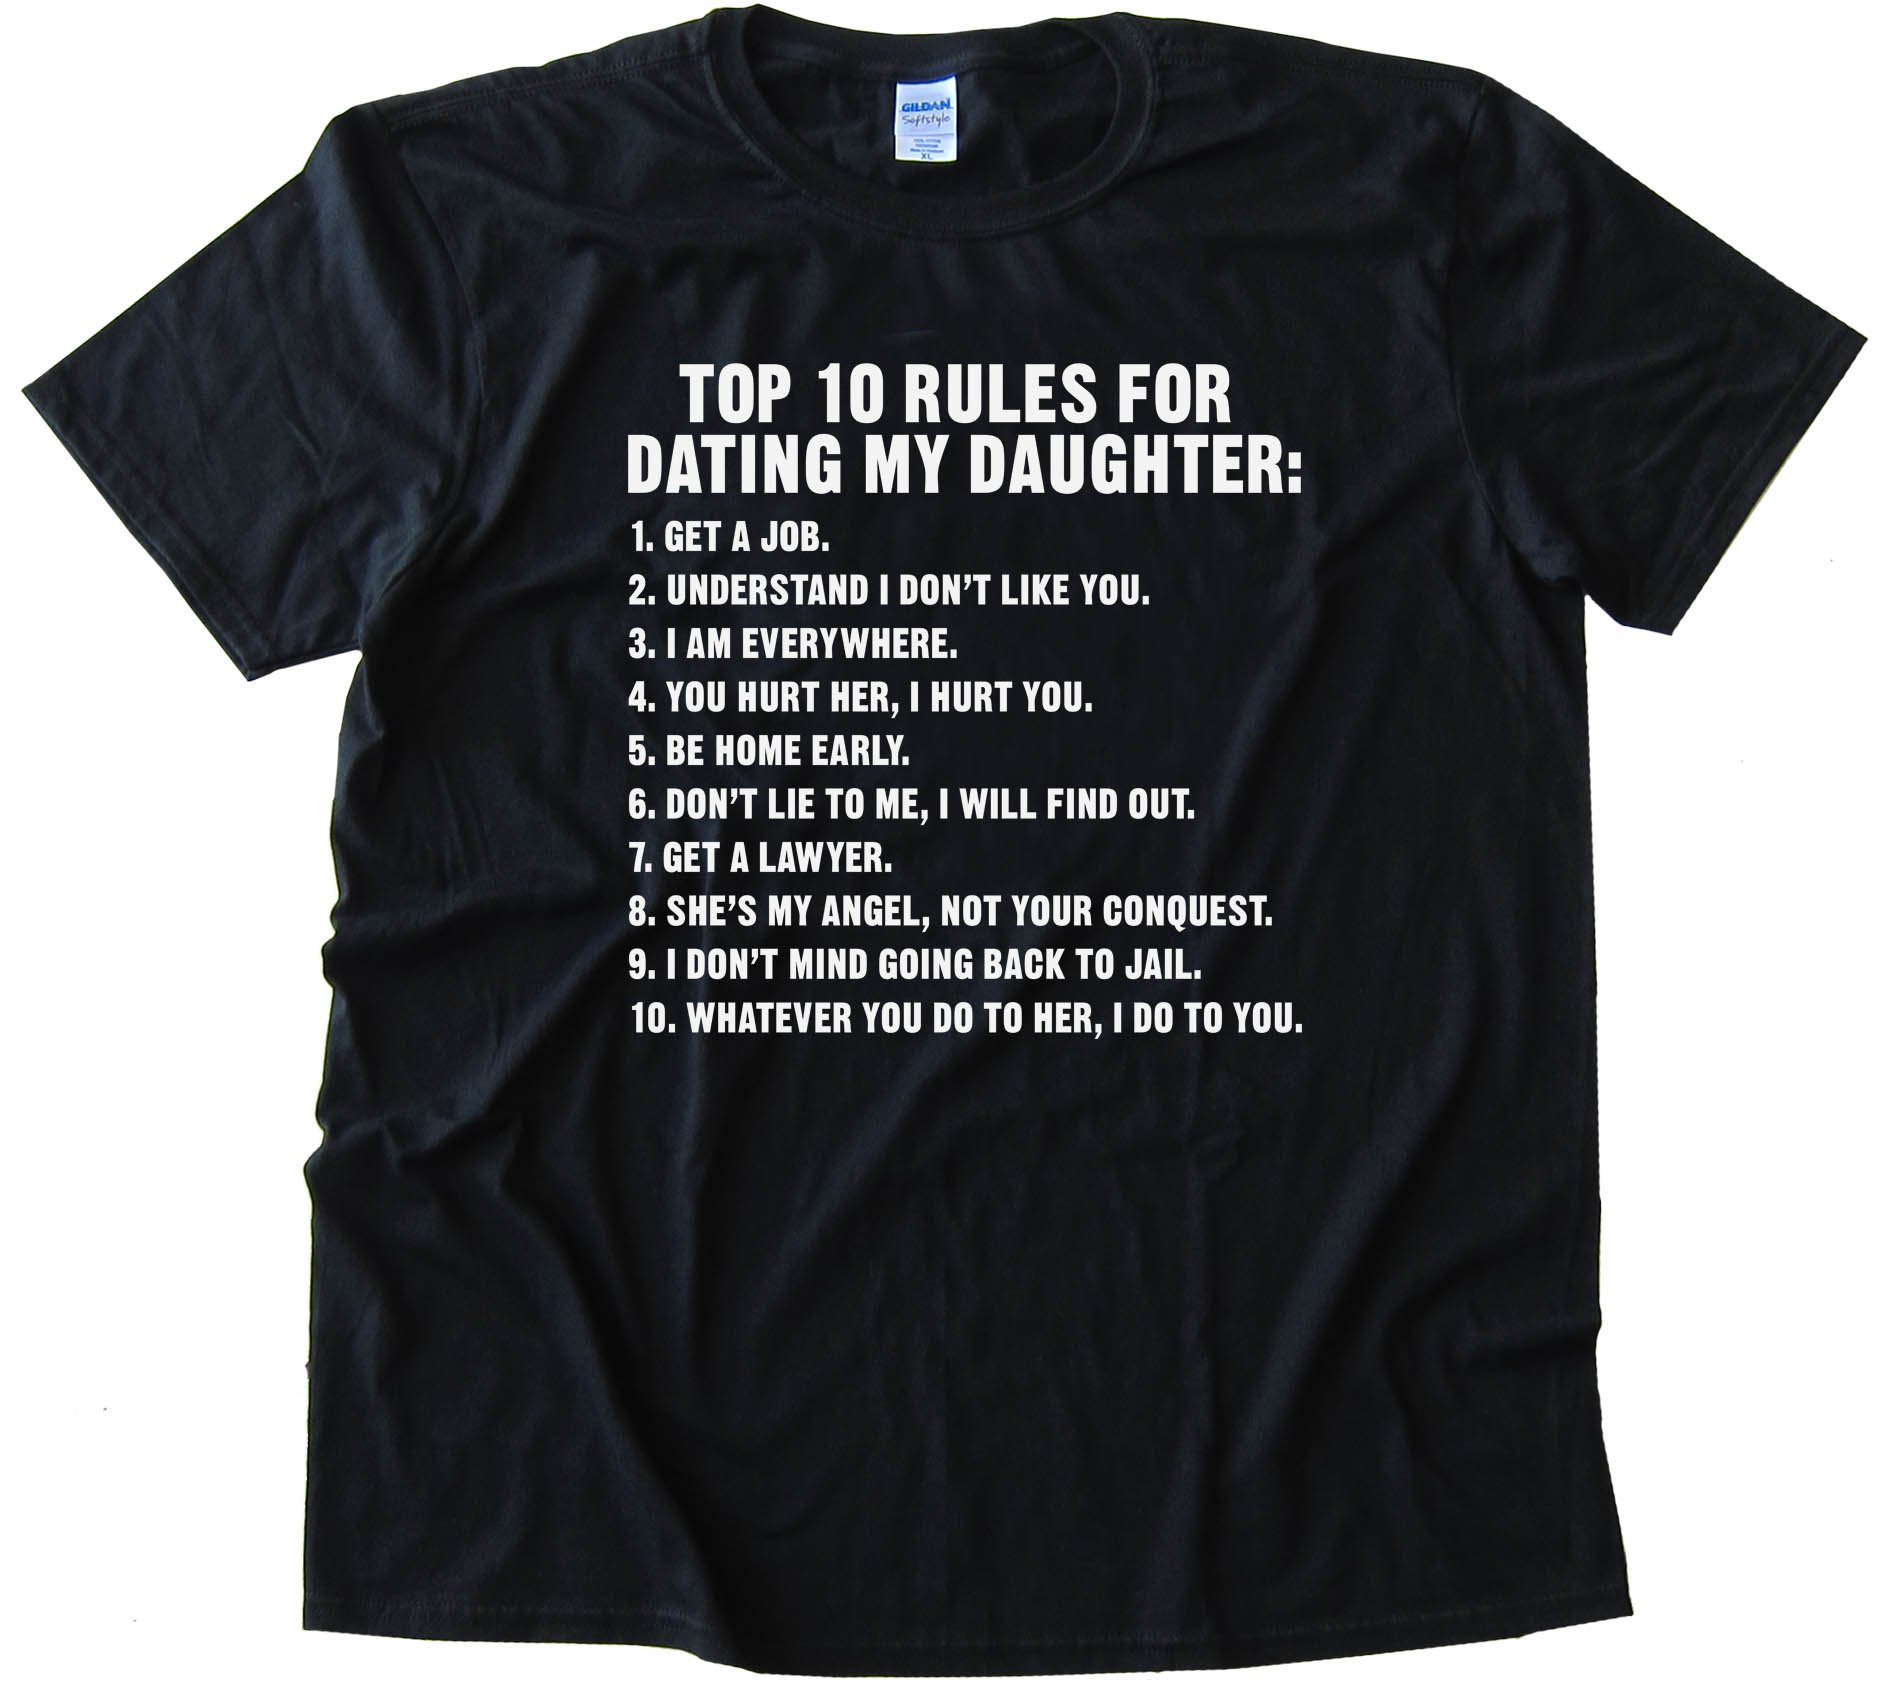 Top 10 Rules For Dating My Daughter - Tee Shirt